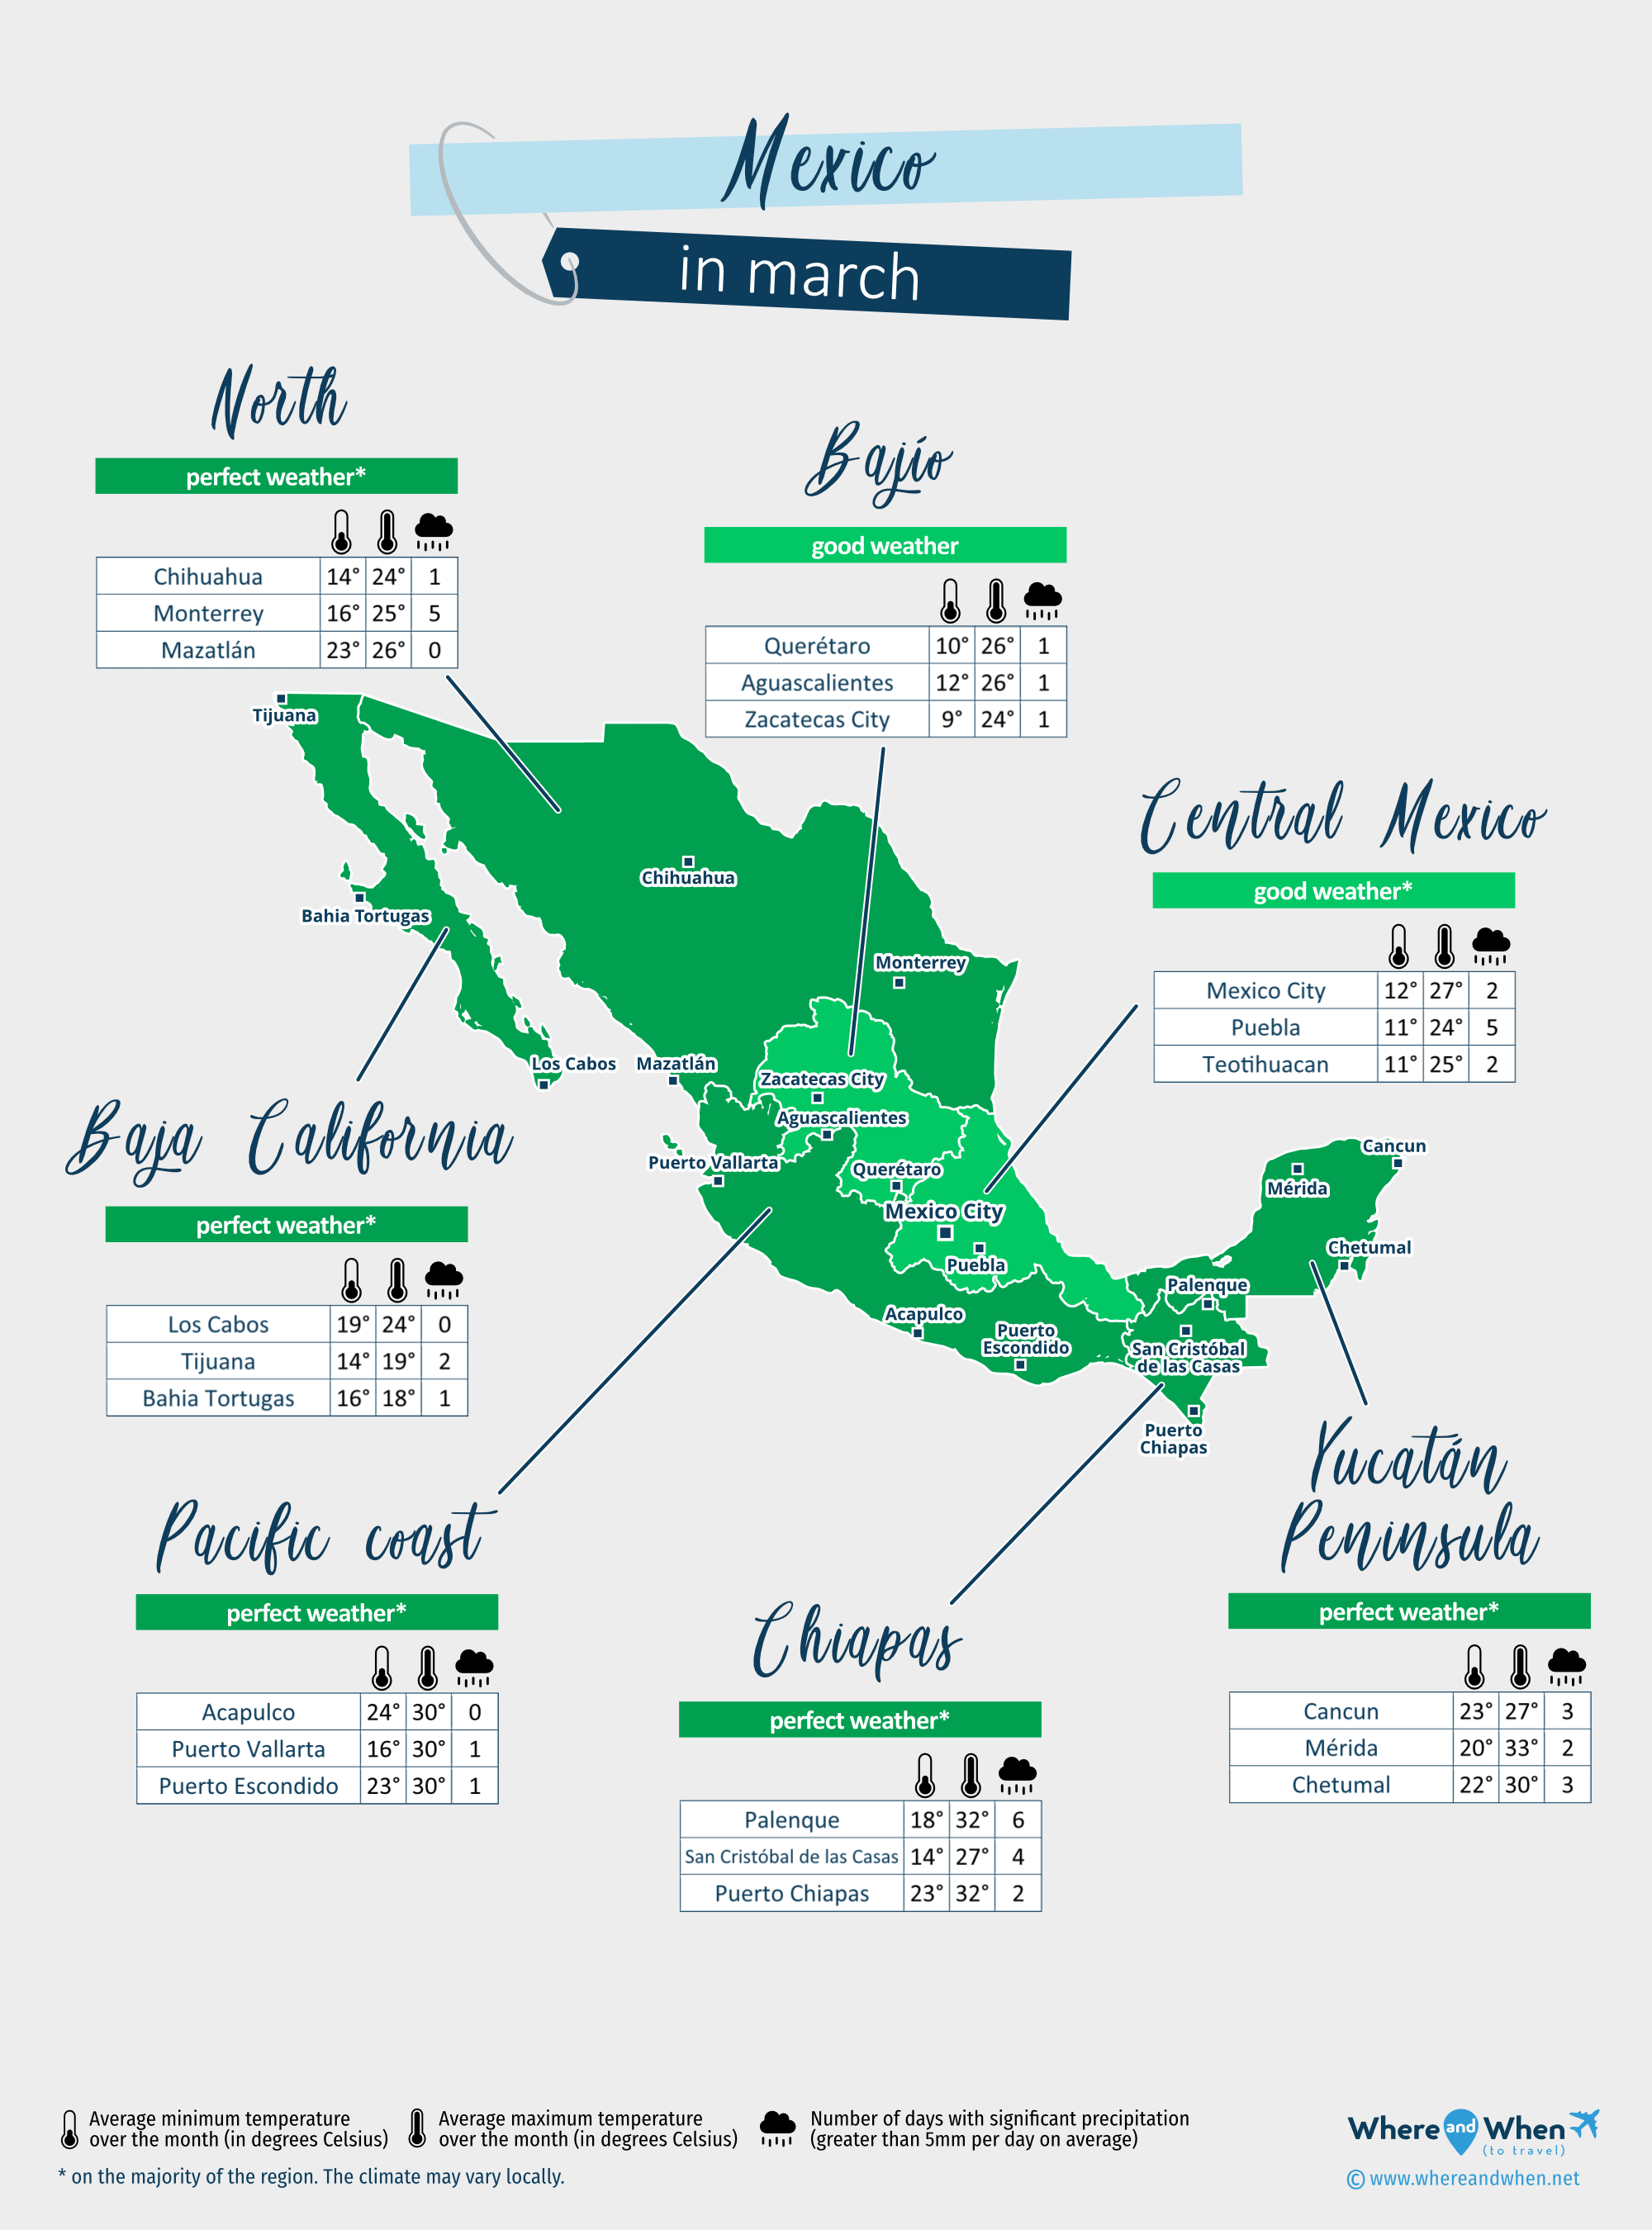 Mexico: weather map in march in different regions